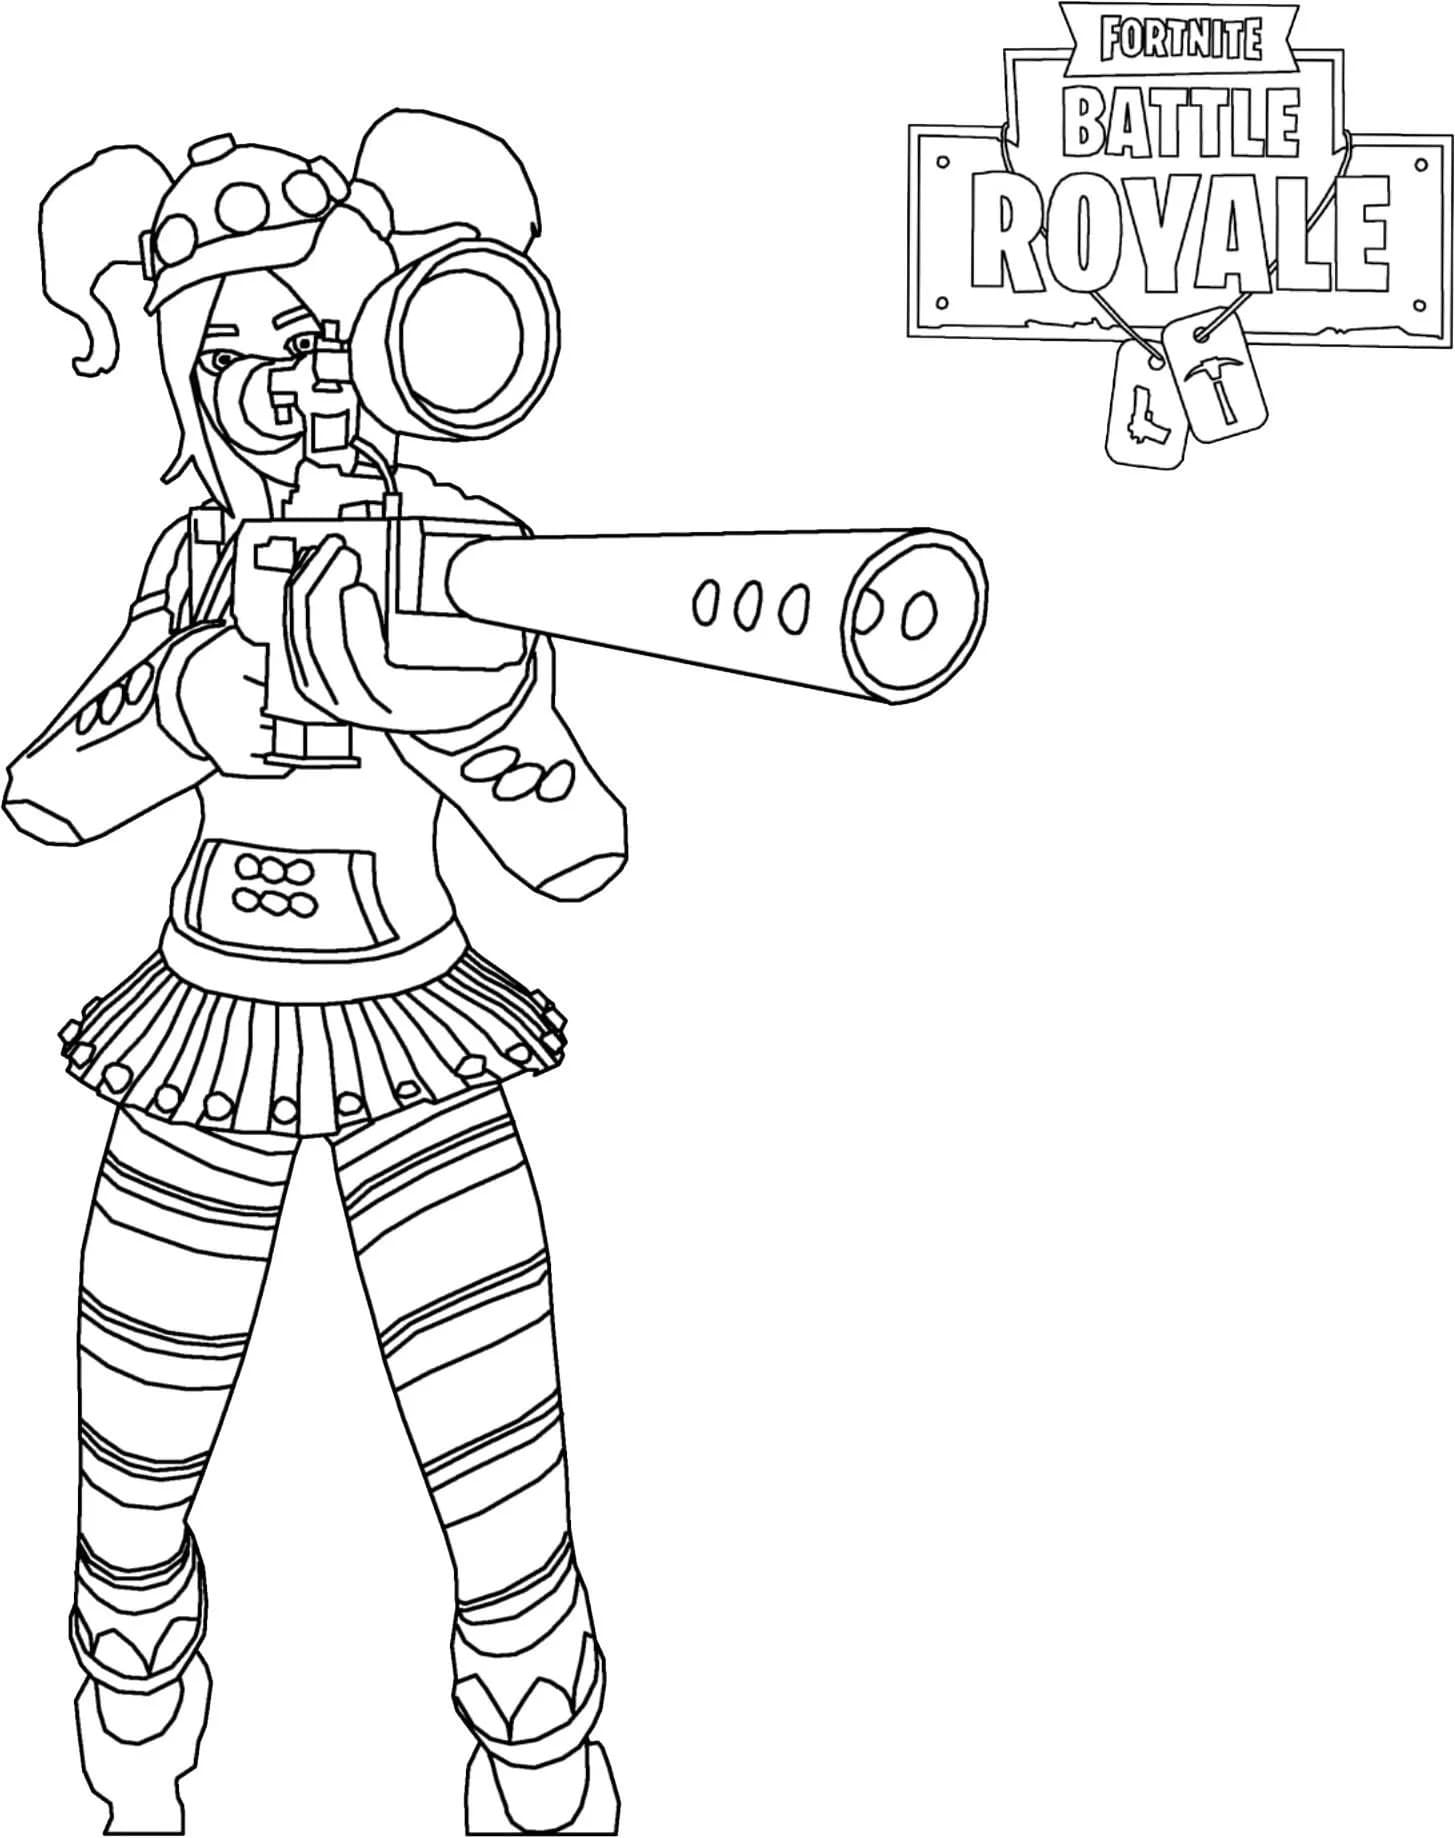 Coloring page: Fortnite (Video Games) #170144 - Free Printable Coloring Pages